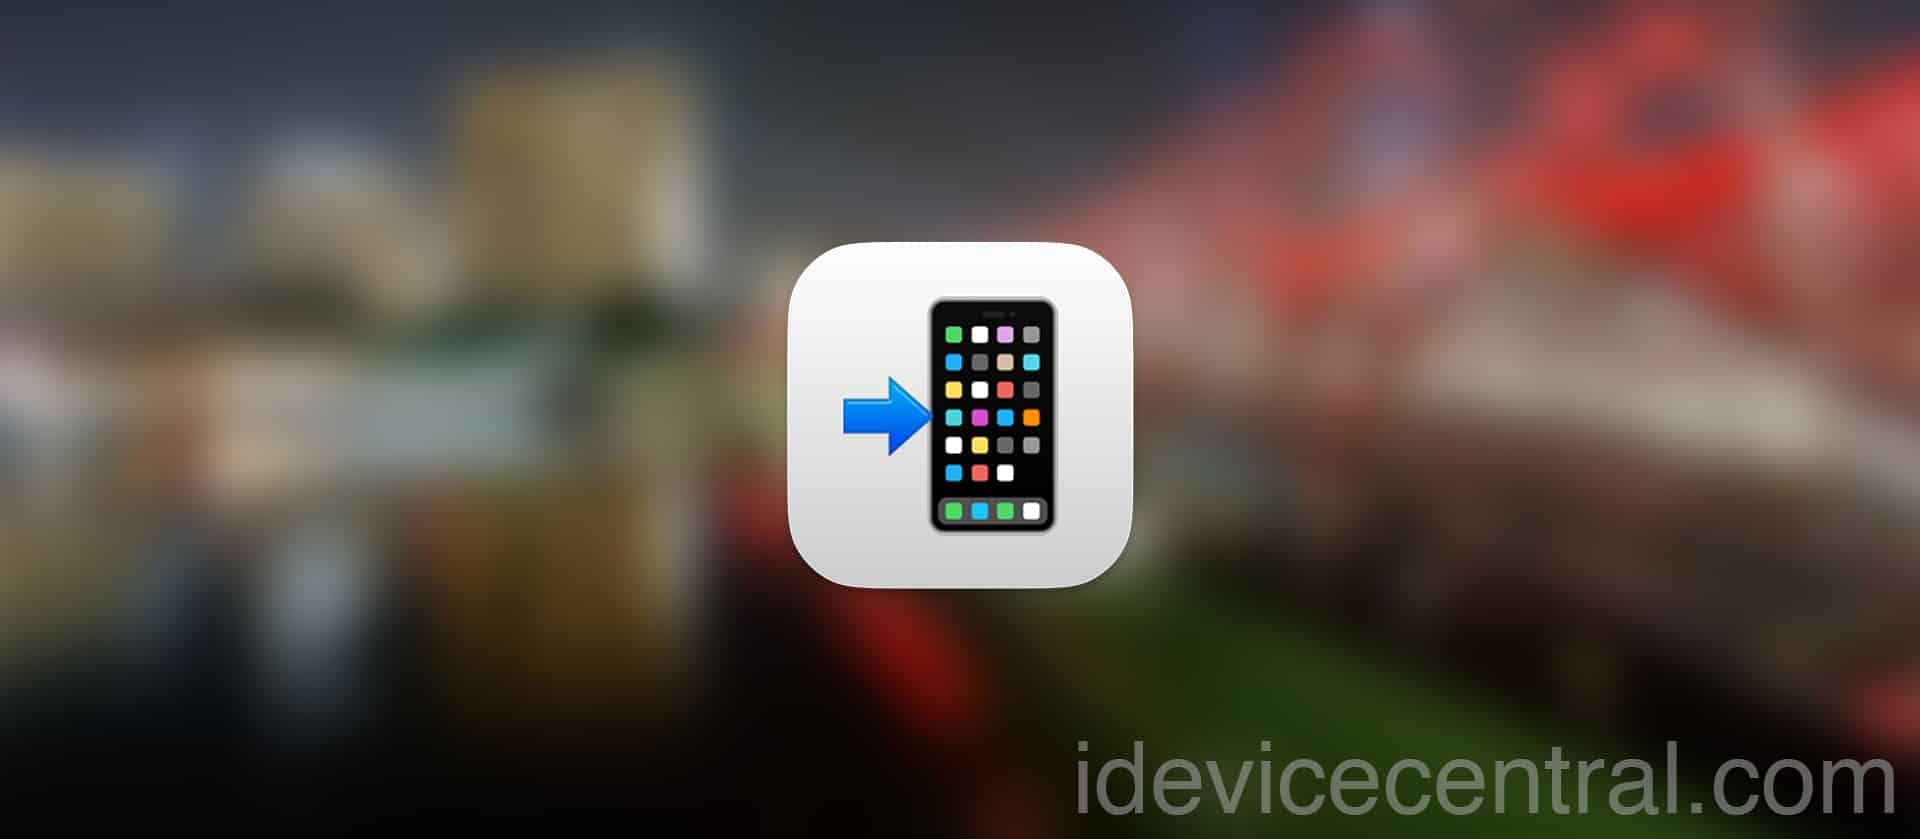 How to Downgrade iOS using FutureRestore GUI and saved SHSH2 Blobs